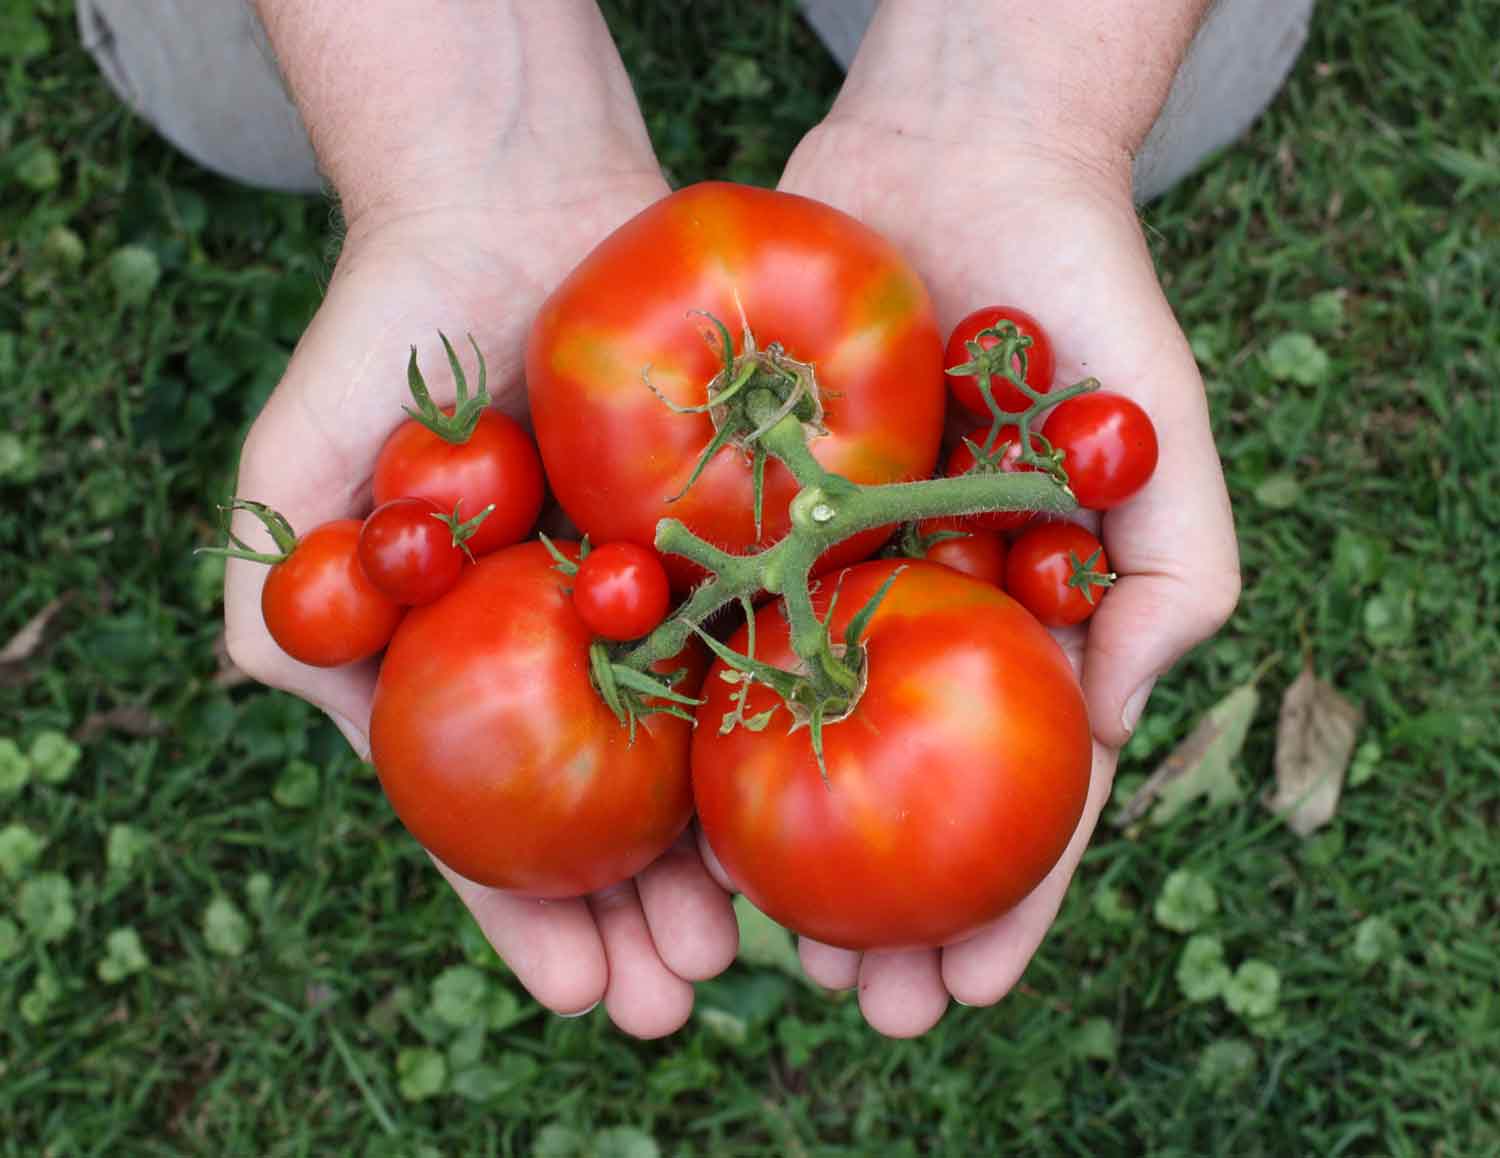 A pair of hands holding newly harvest tomatoes.